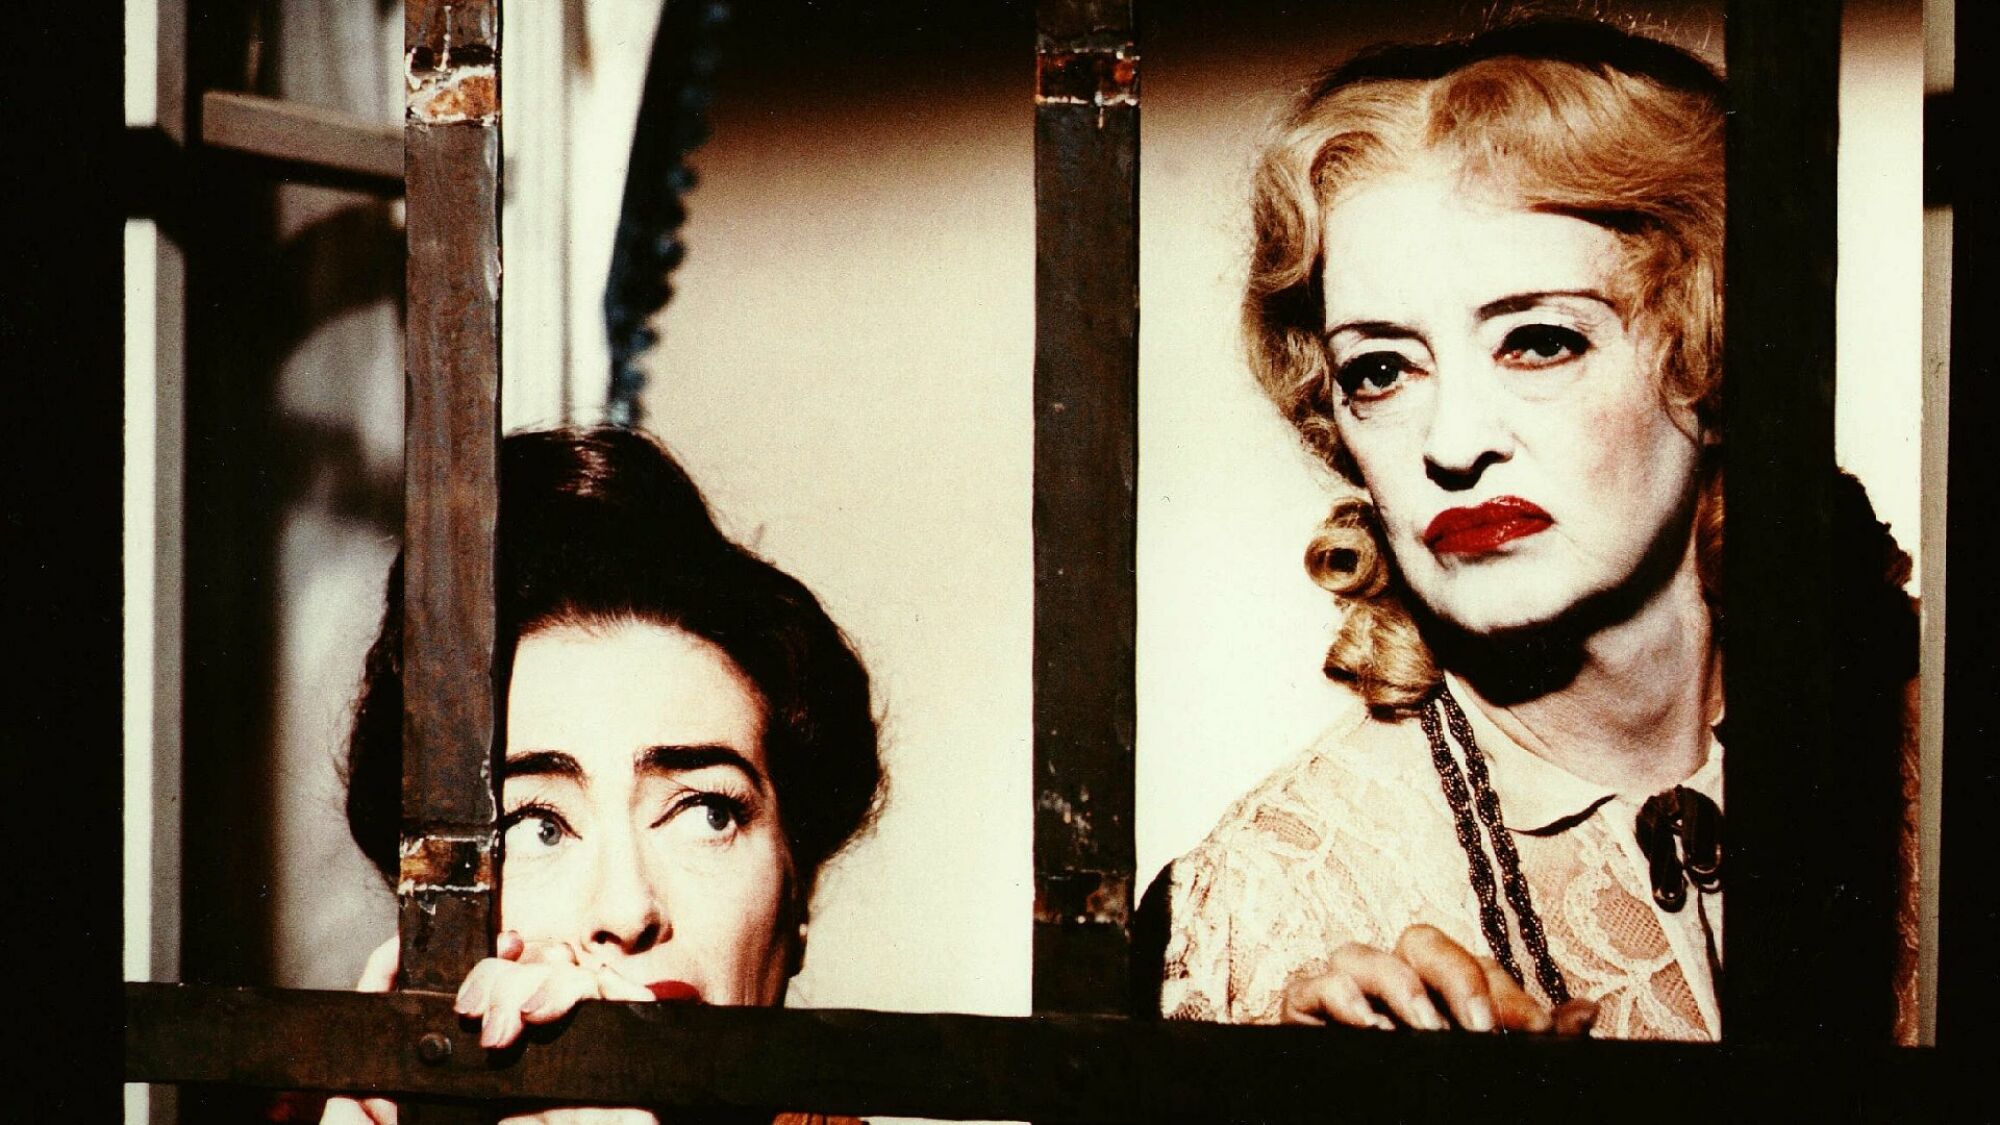 Joan Crawford and Bette Davis in "What Ever Happened to Baby Jane? - 1962